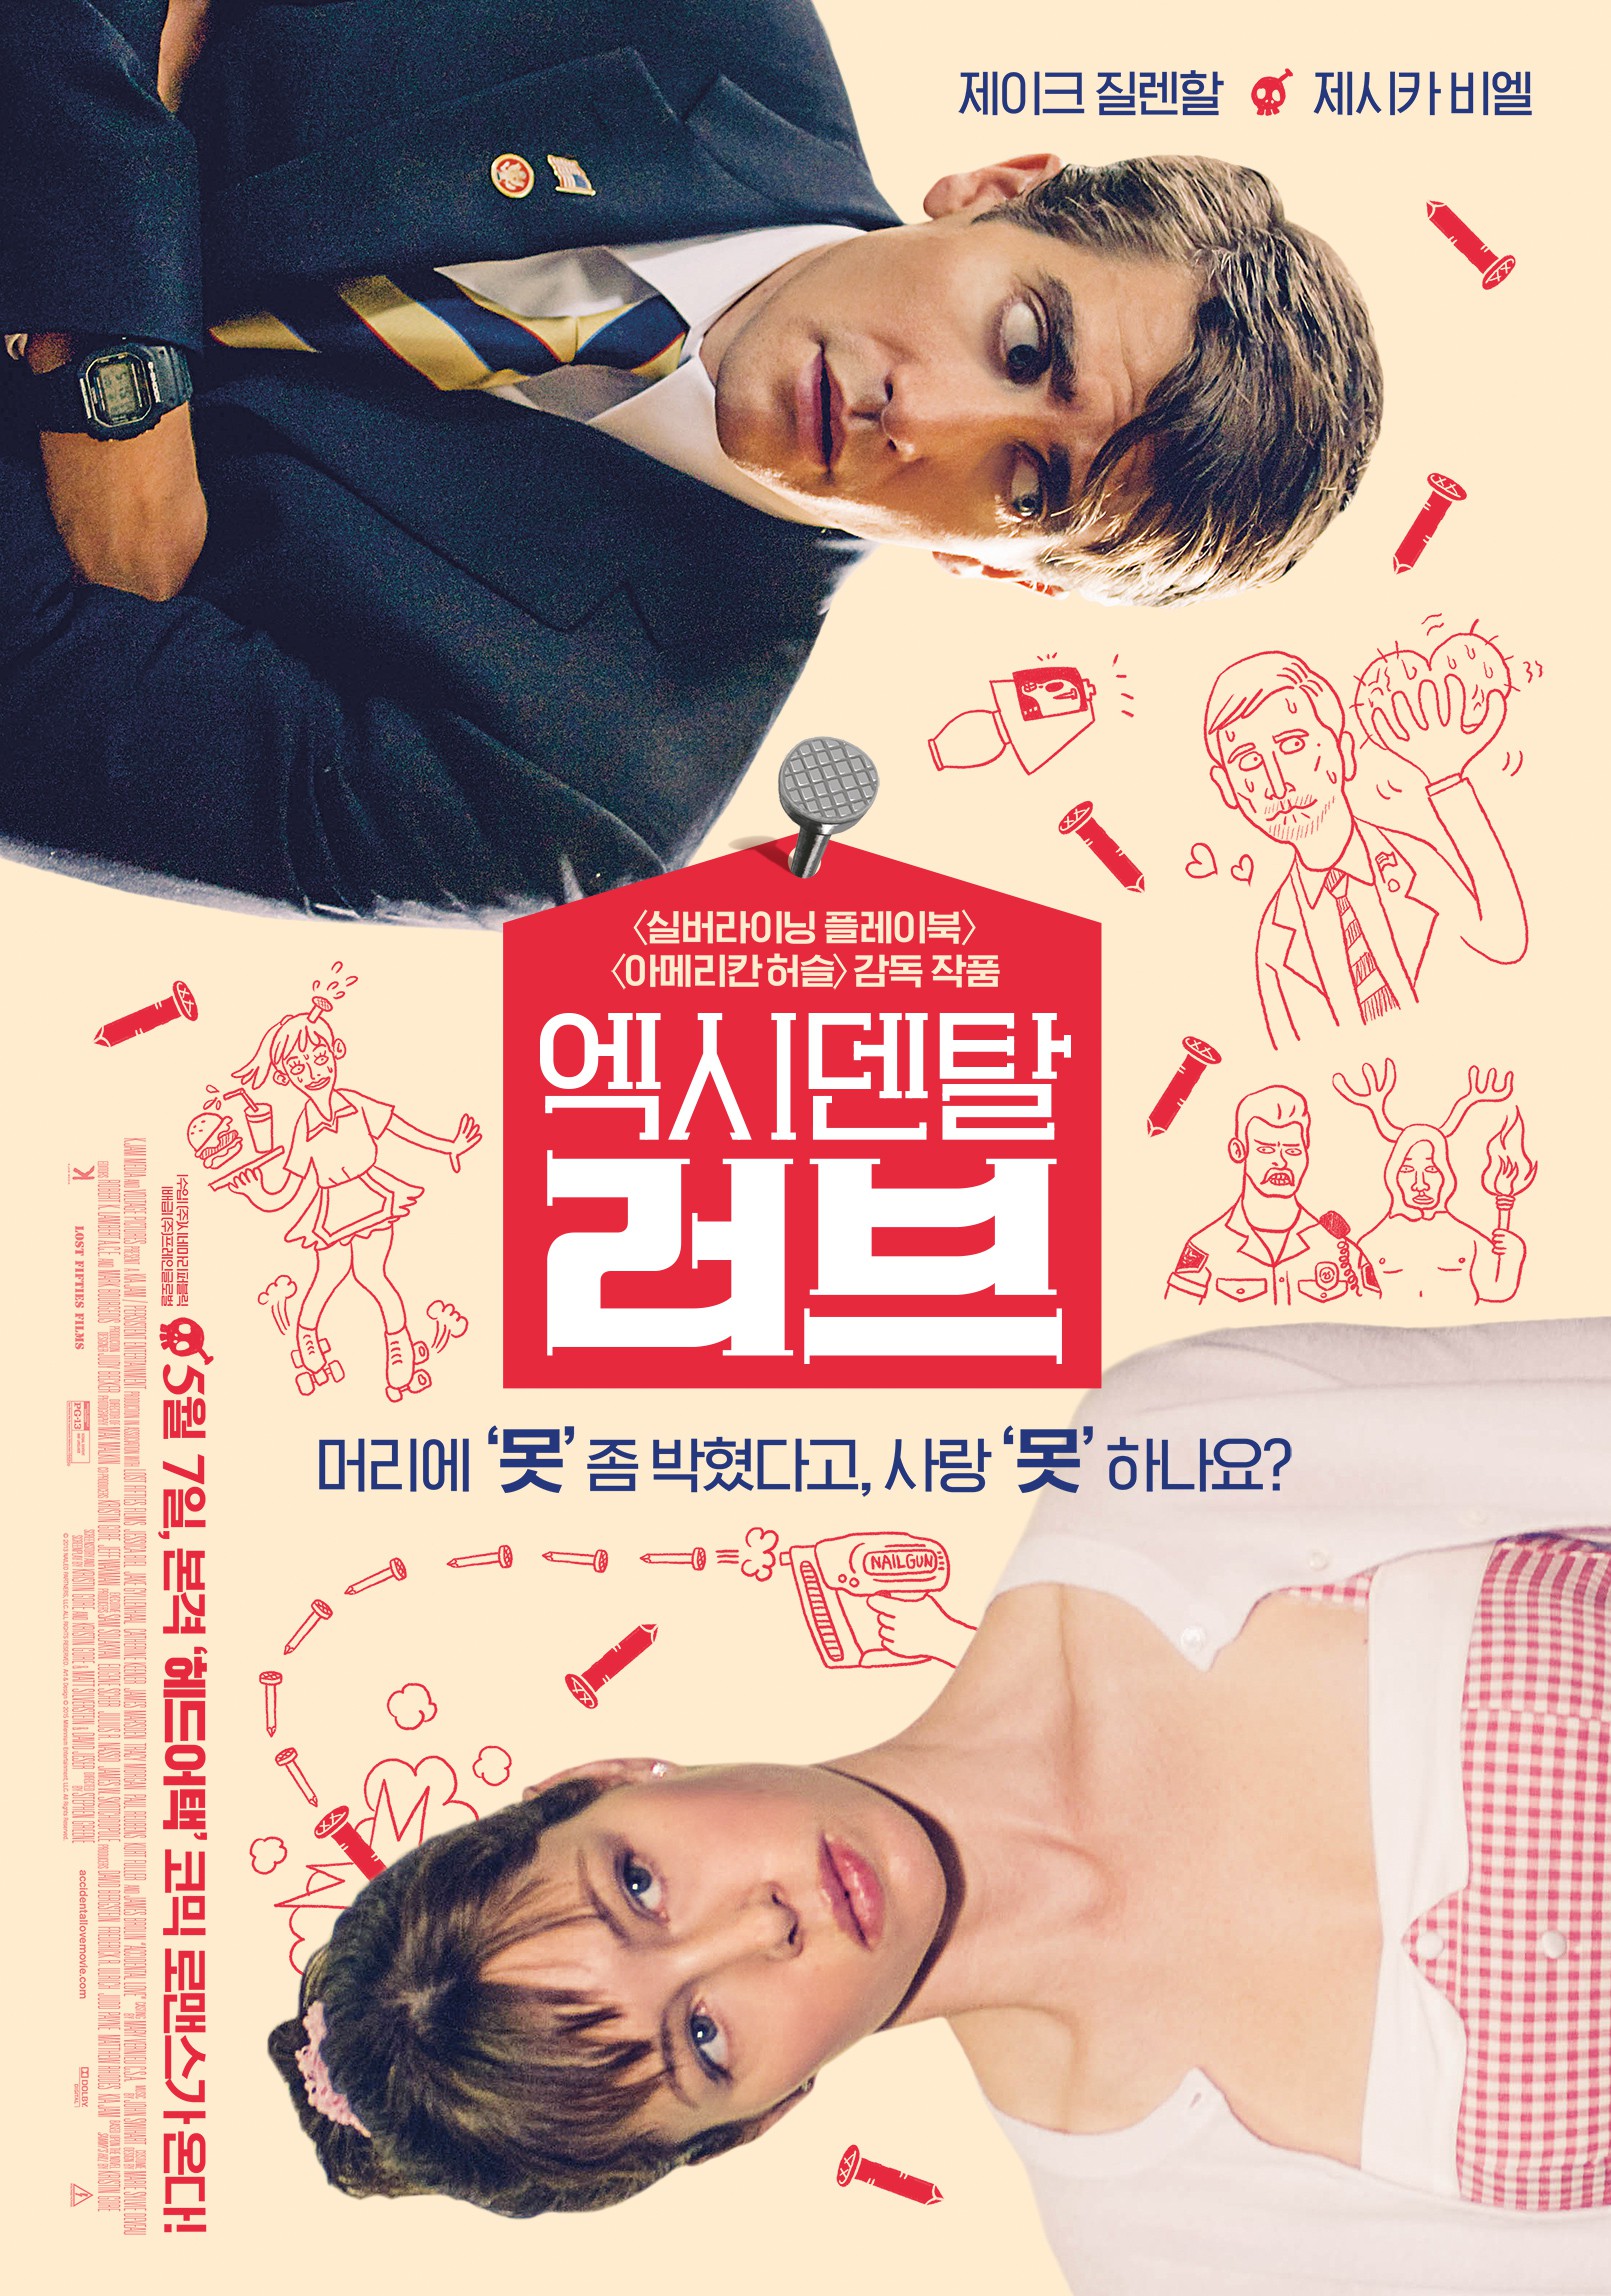 Mega Sized Movie Poster Image for Accidental Love (#2 of 3)